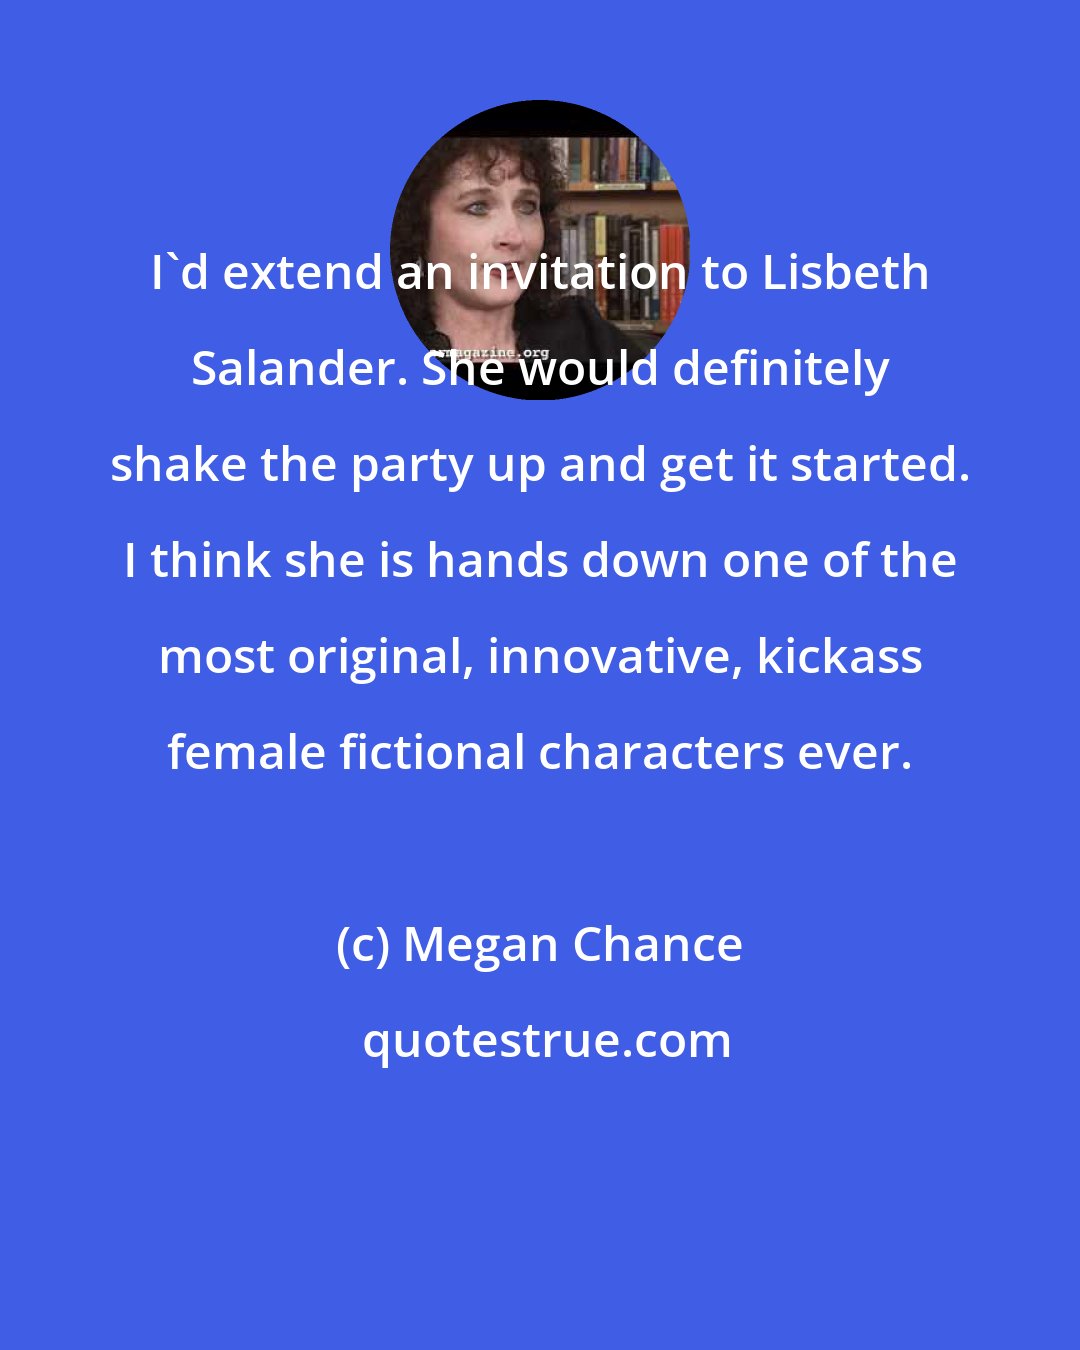 Megan Chance: I'd extend an invitation to Lisbeth Salander. She would definitely shake the party up and get it started. I think she is hands down one of the most original, innovative, kickass female fictional characters ever.